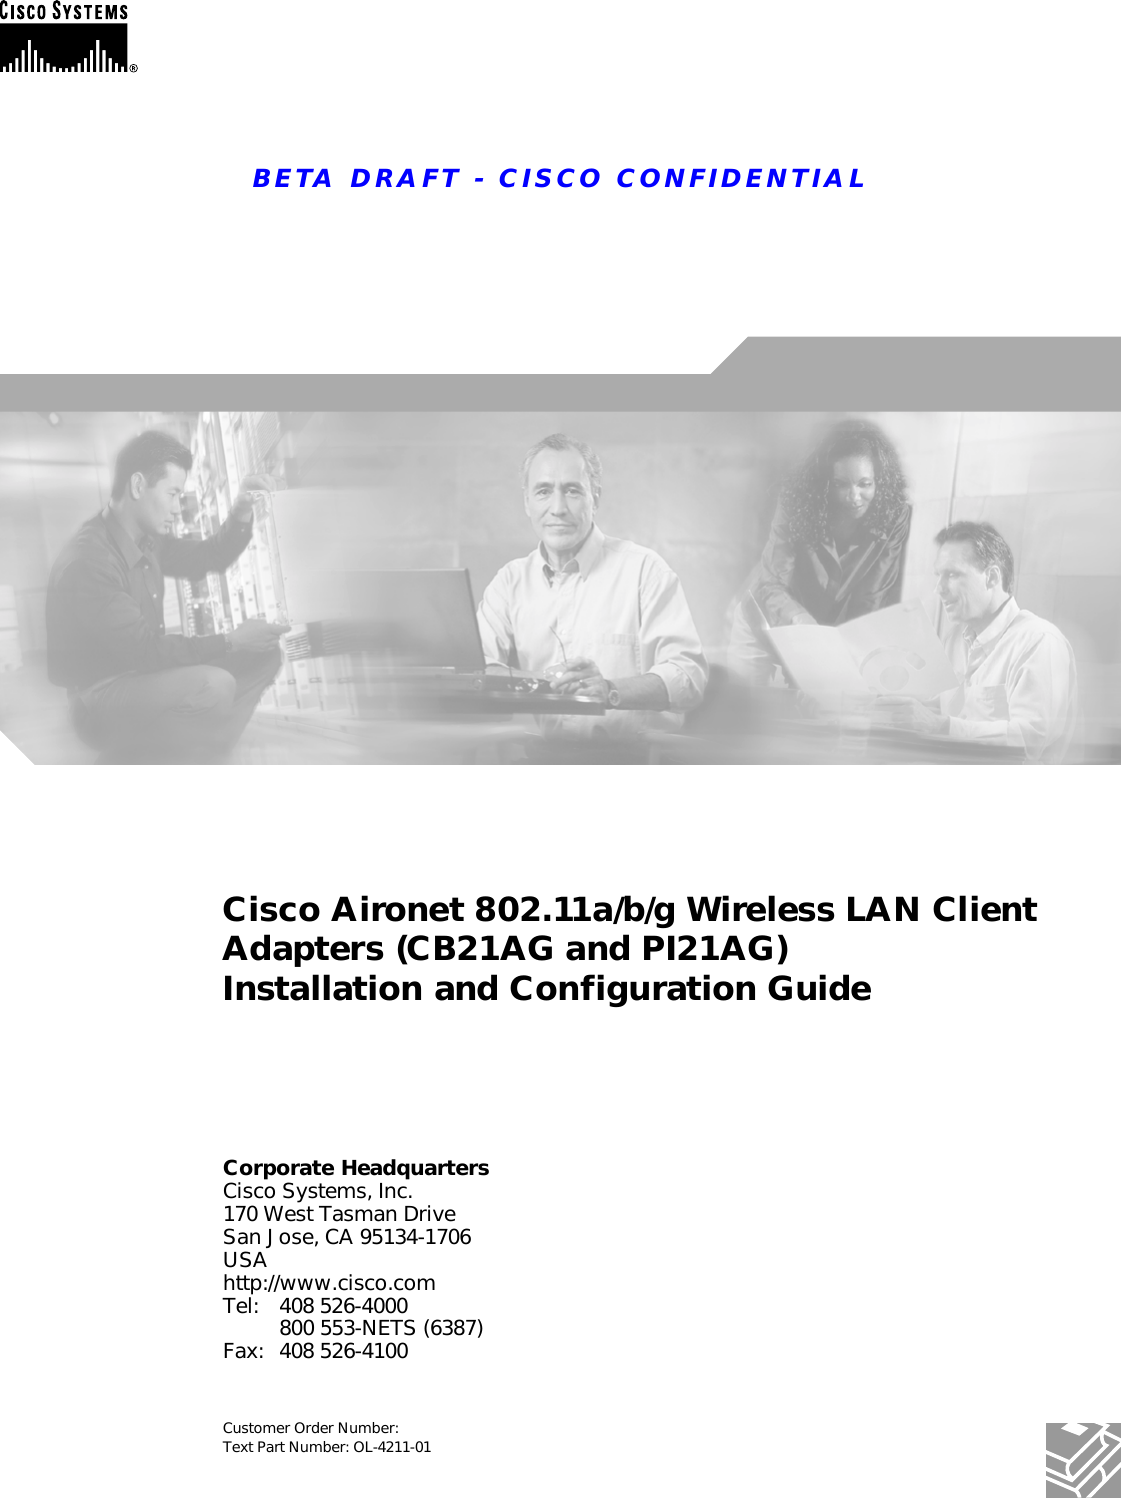 BETA DRAFT - CISCO CONFIDENTIALCorporate HeadquartersCisco Systems, Inc.170 West Tasman DriveSan Jose, CA 95134-1706 USAhttp://www.cisco.comTel: 408 526-4000800 553-NETS (6387)Fax: 408 526-4100Cisco Aironet 802.11a/b/g Wireless LAN Client Adapters (CB21AG and PI21AG)Installation and Configuration GuideCustomer Order Number: Text Part Number: OL-4211-01